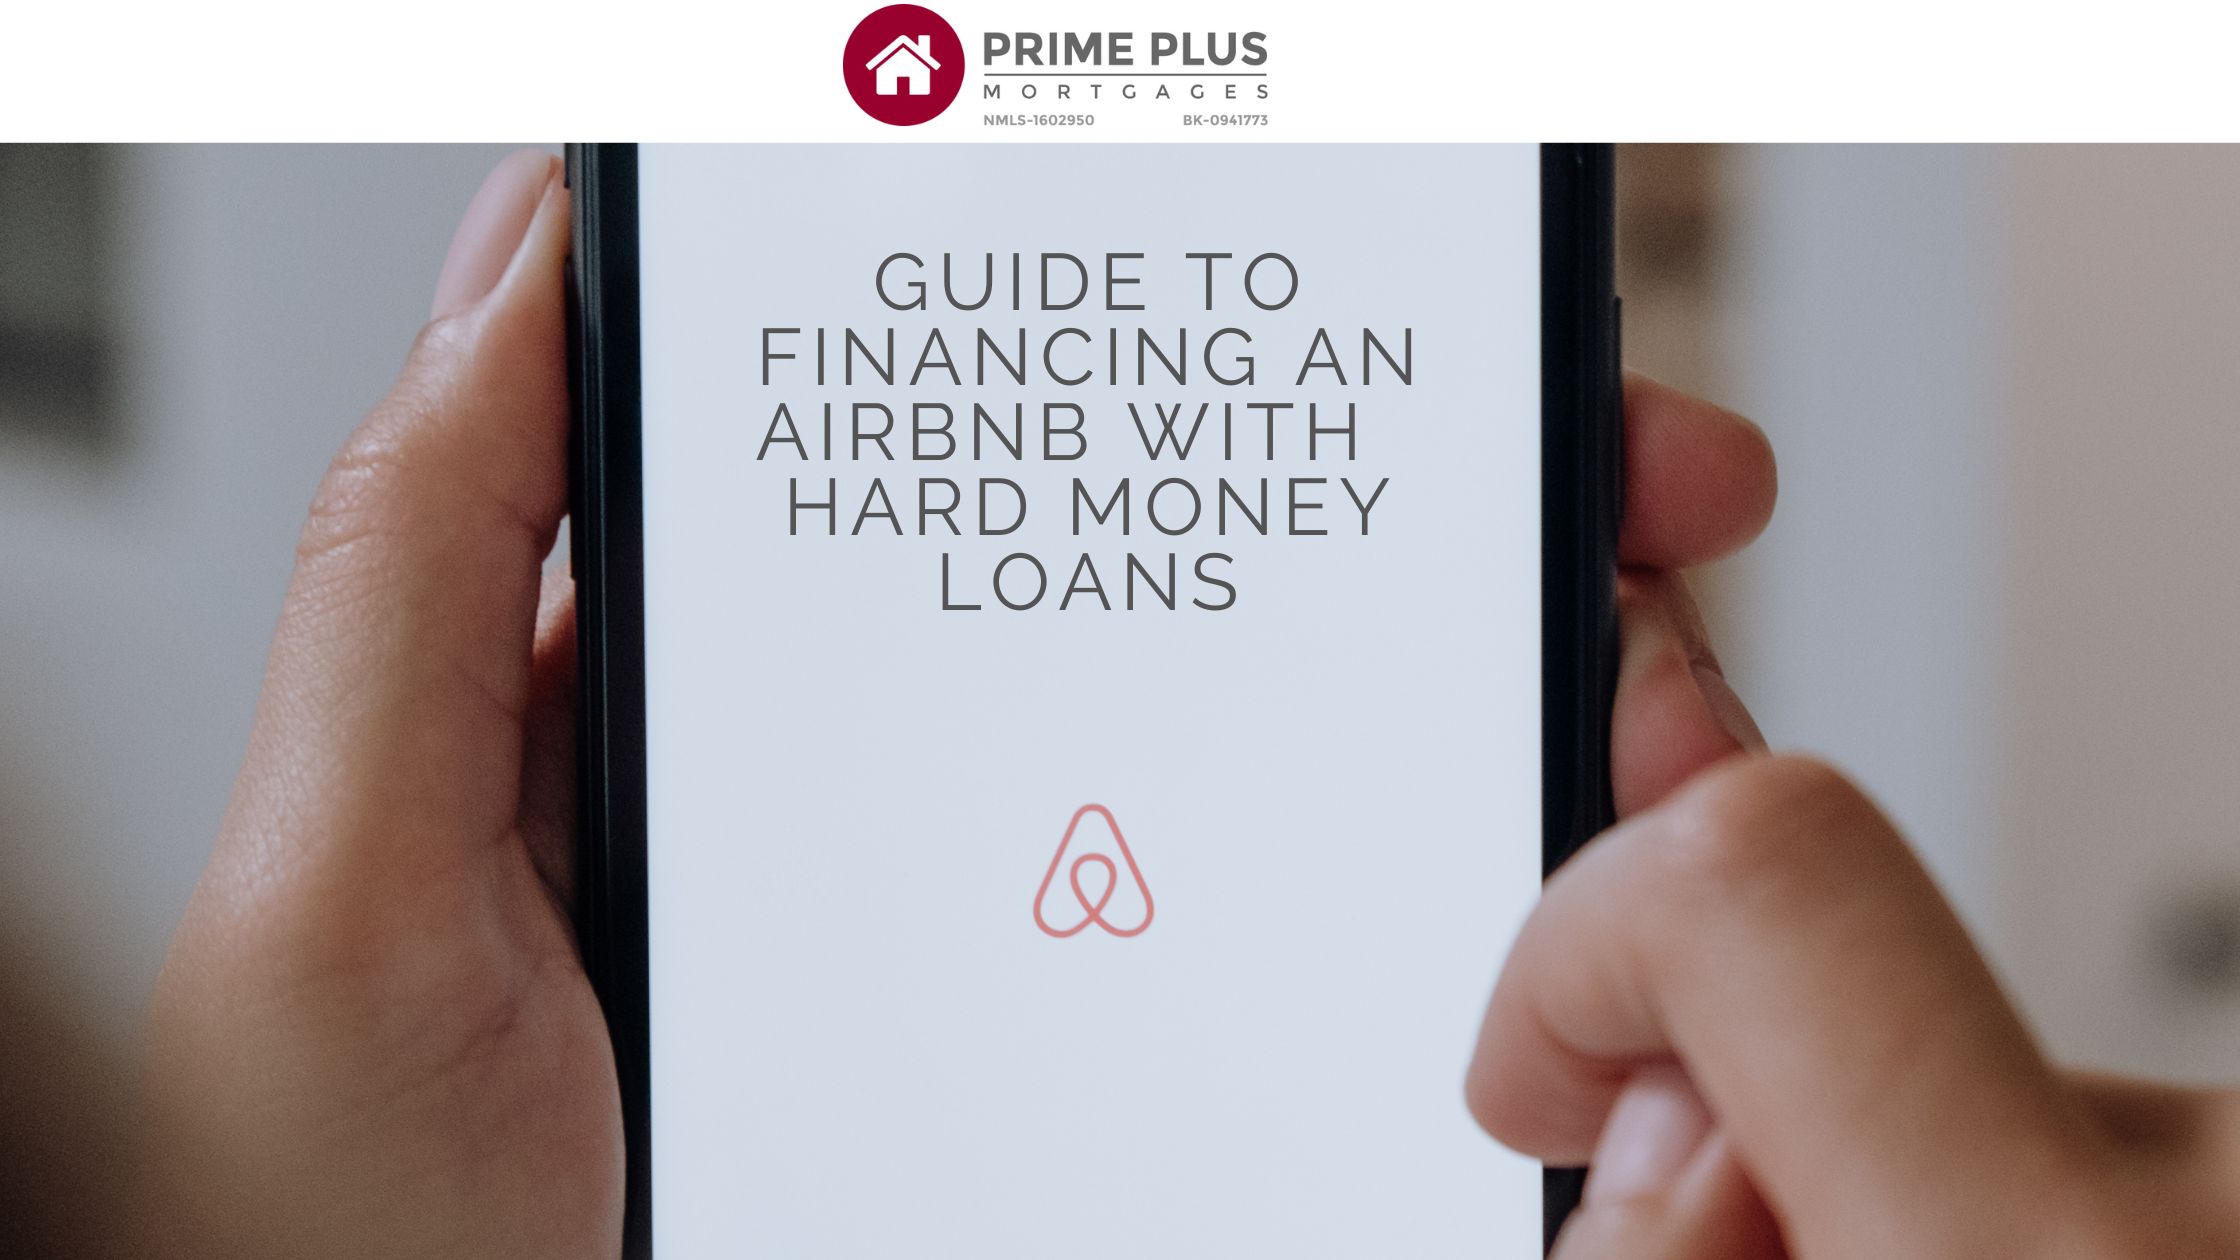 Guide To Financing an Airbnb with Hard Money Loans